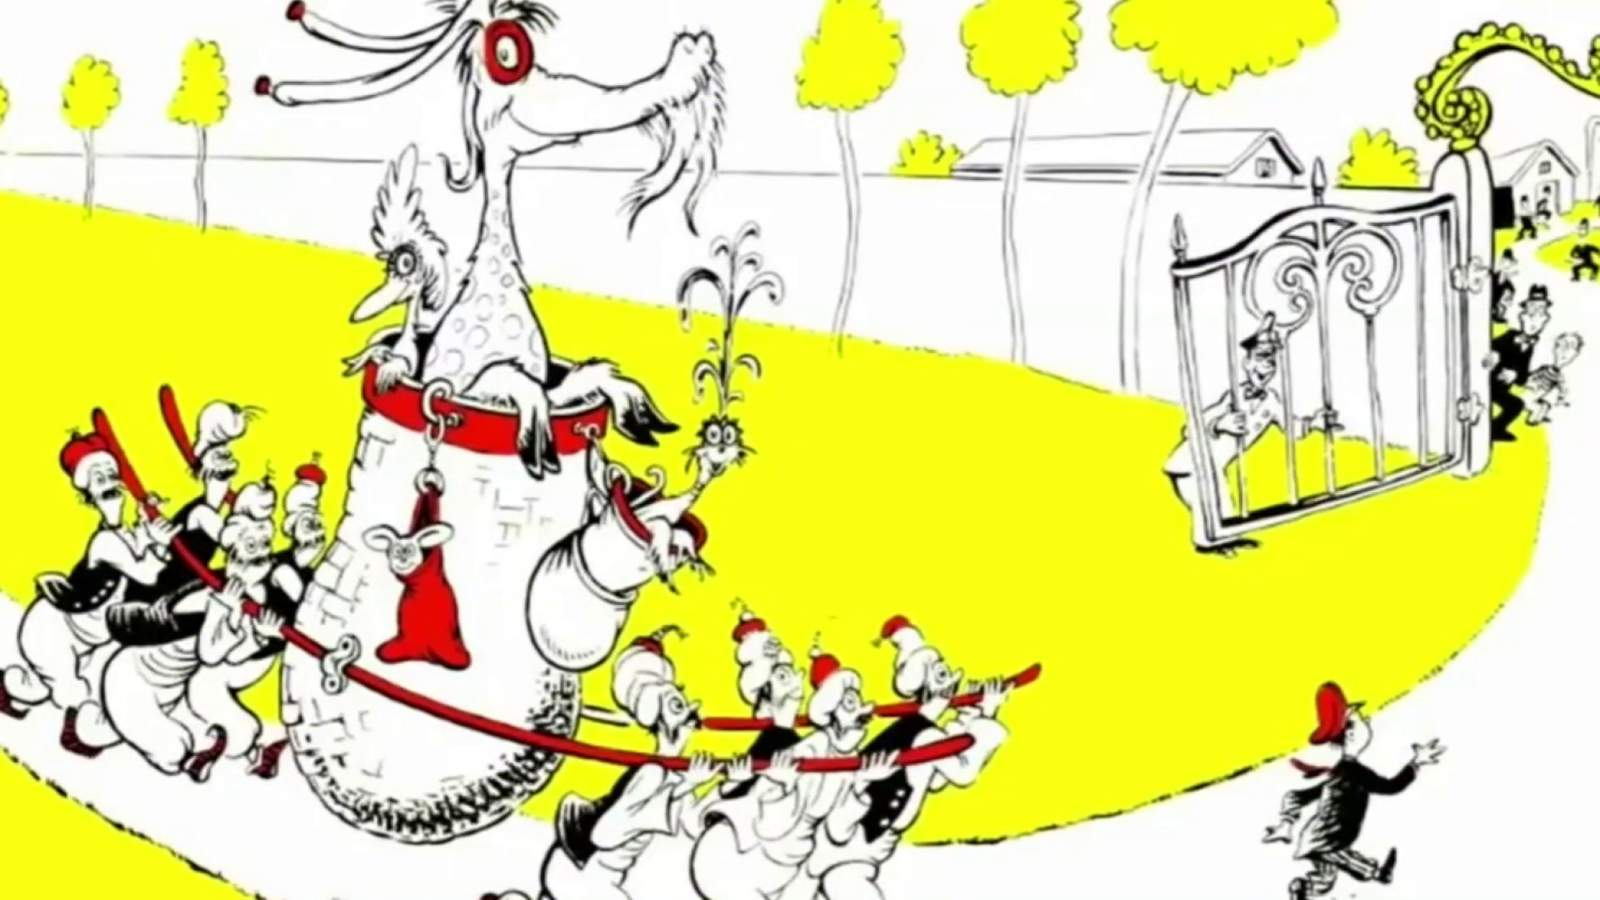 6 Dr. Seuss books won’t be published for racist images